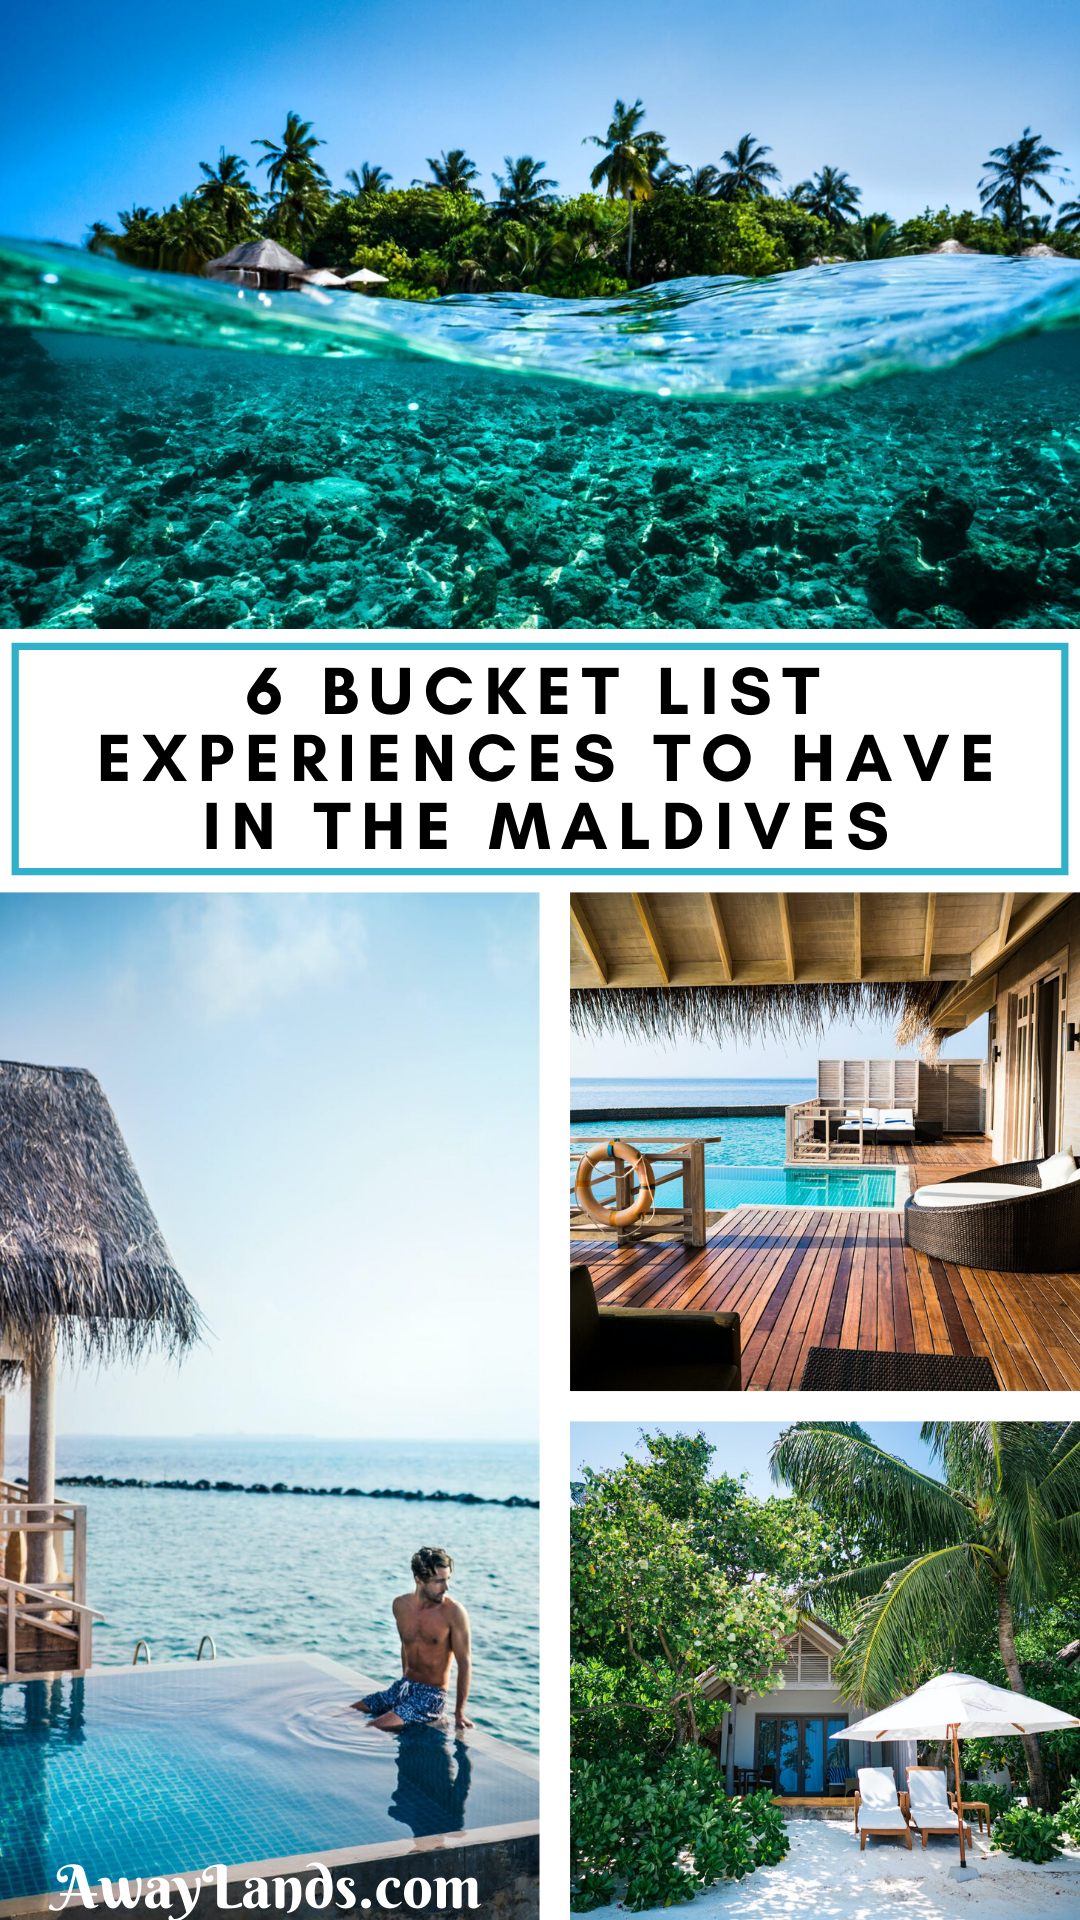 Check out this list of 6 bucket list experiences to have in the Maldives. From relaxing in your overwater bungalow to enjoy all of the water activities in the Maldives, find something to add to your Maldives bucket list here. #maldives #bucketlist #travel | best things to do in the Maldives | things to do in the Maldives honeymoon | things to do in the Maldives bucket lists | Maldives travel bucket lists | Maldives bucket list travel | Maldives things to do bucket lists